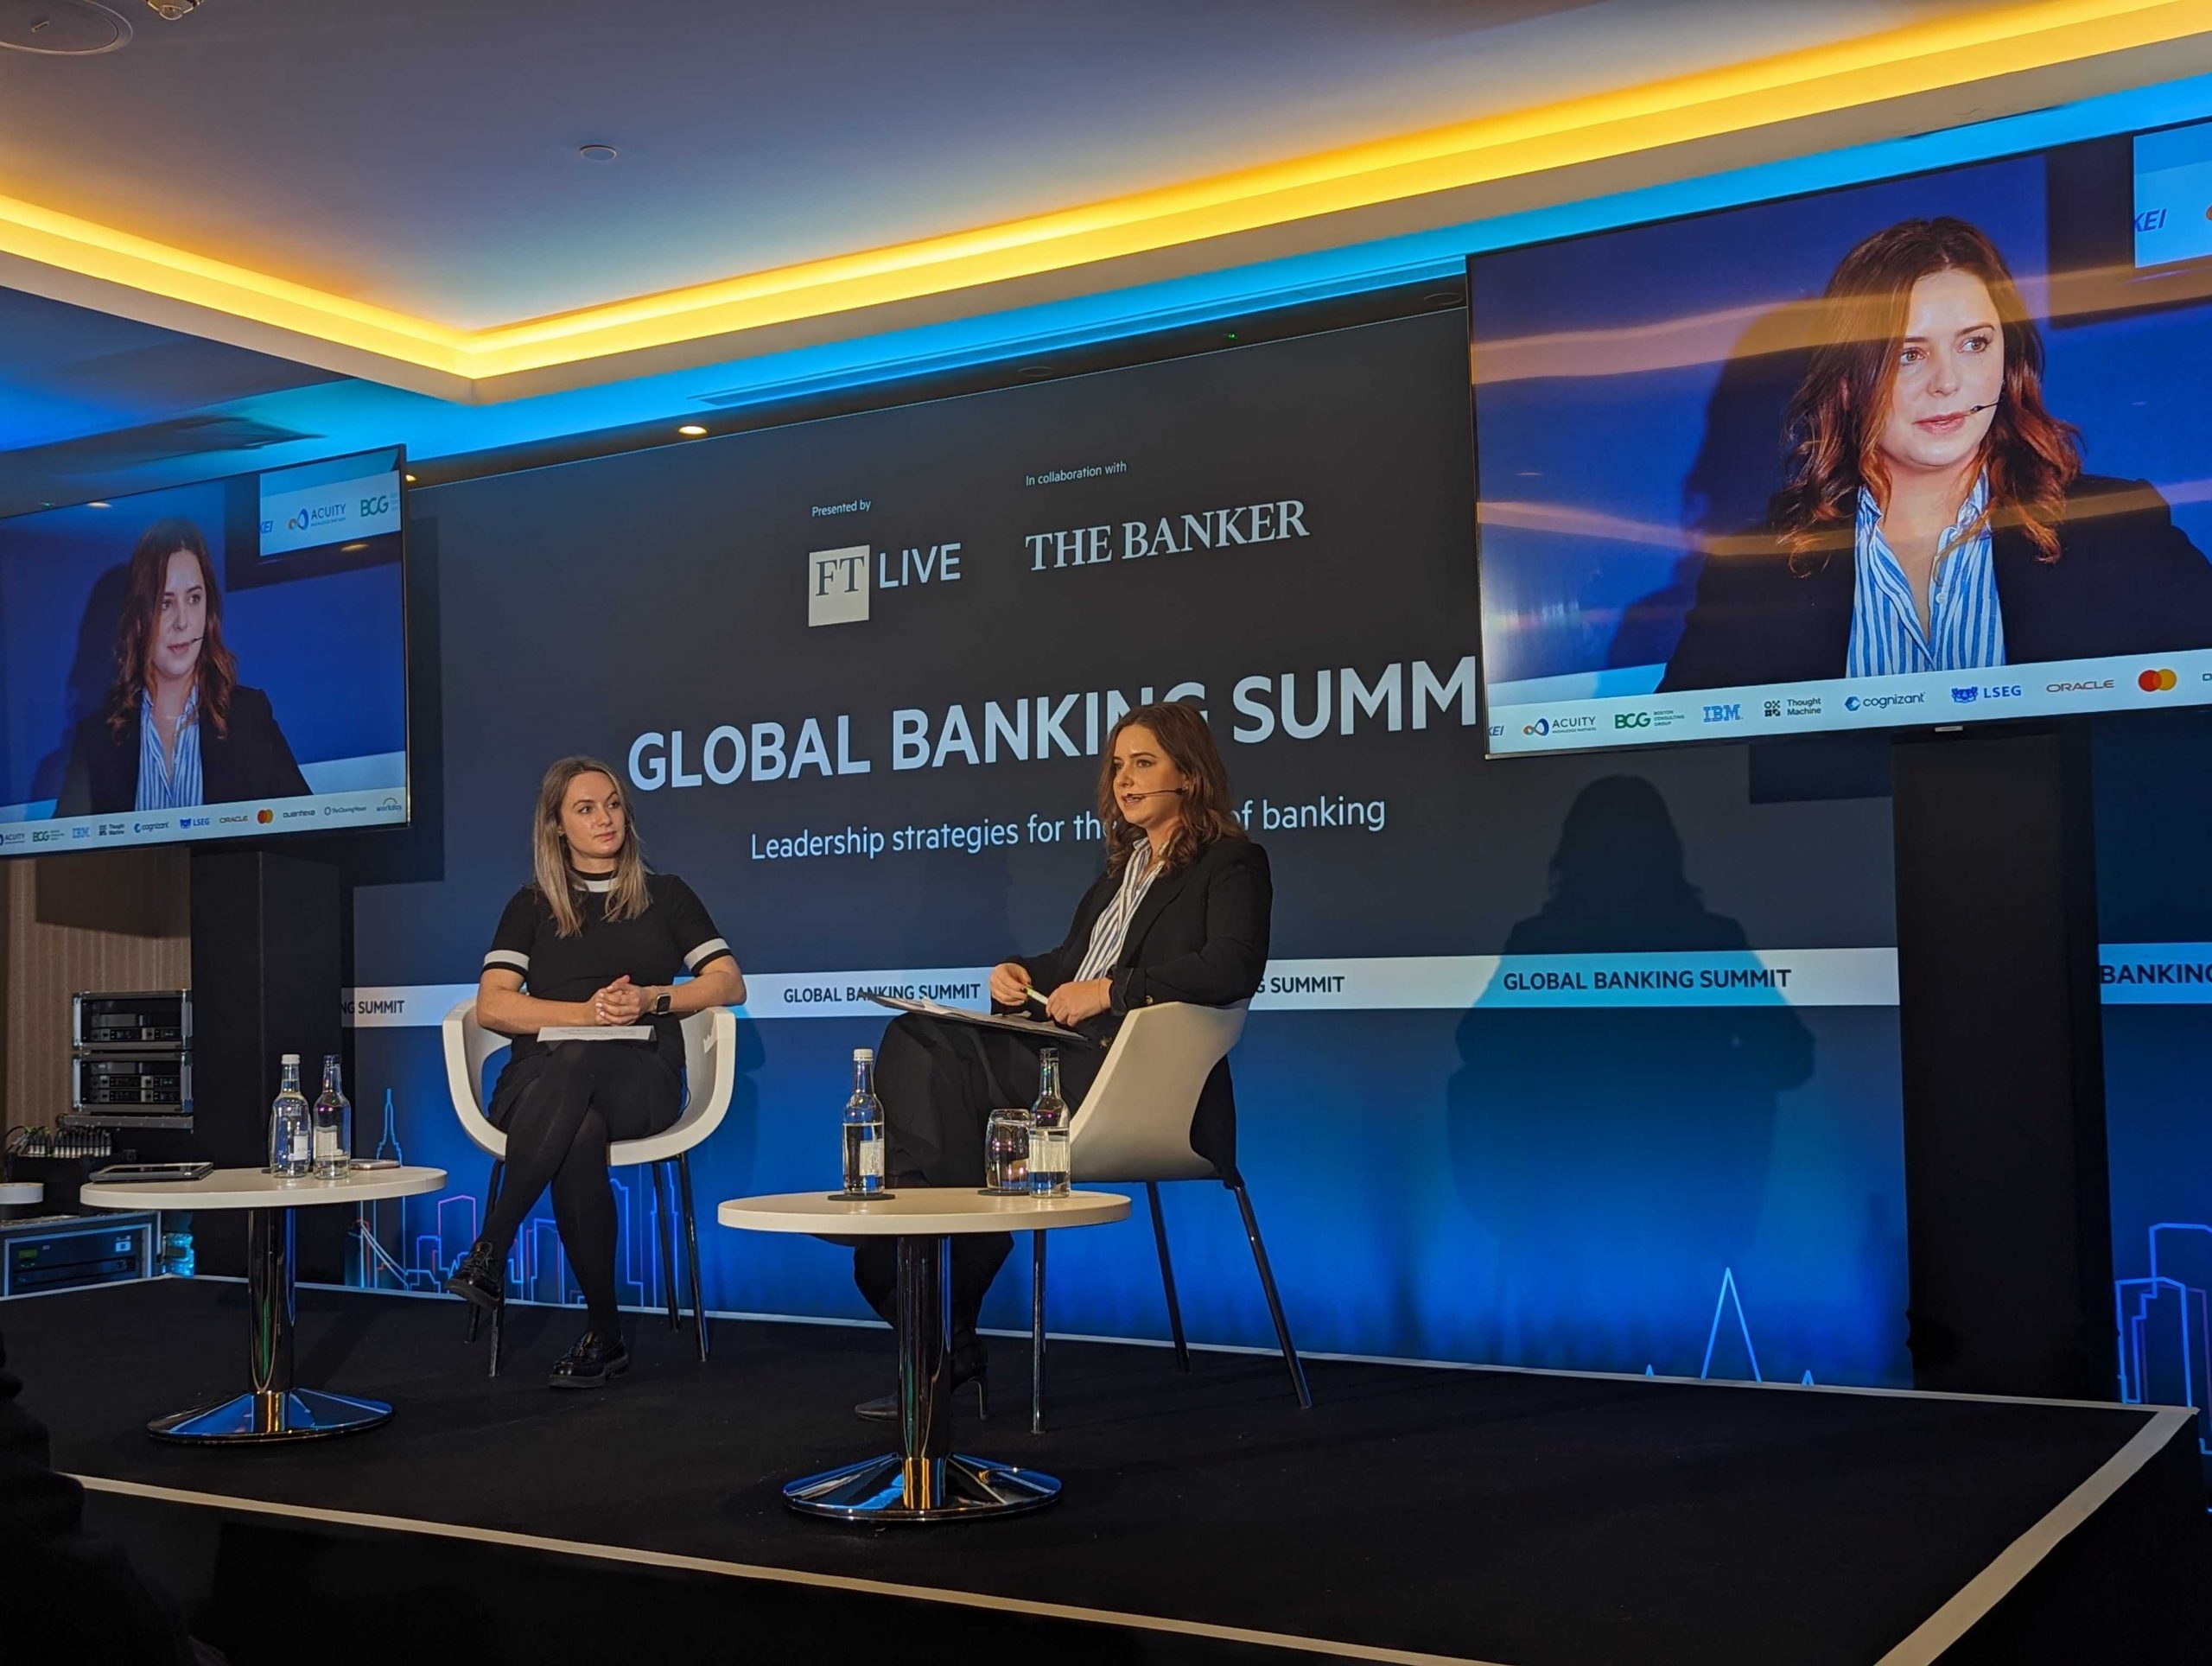 Ilana sat on stage at the Global Banking Summit with screens behind here